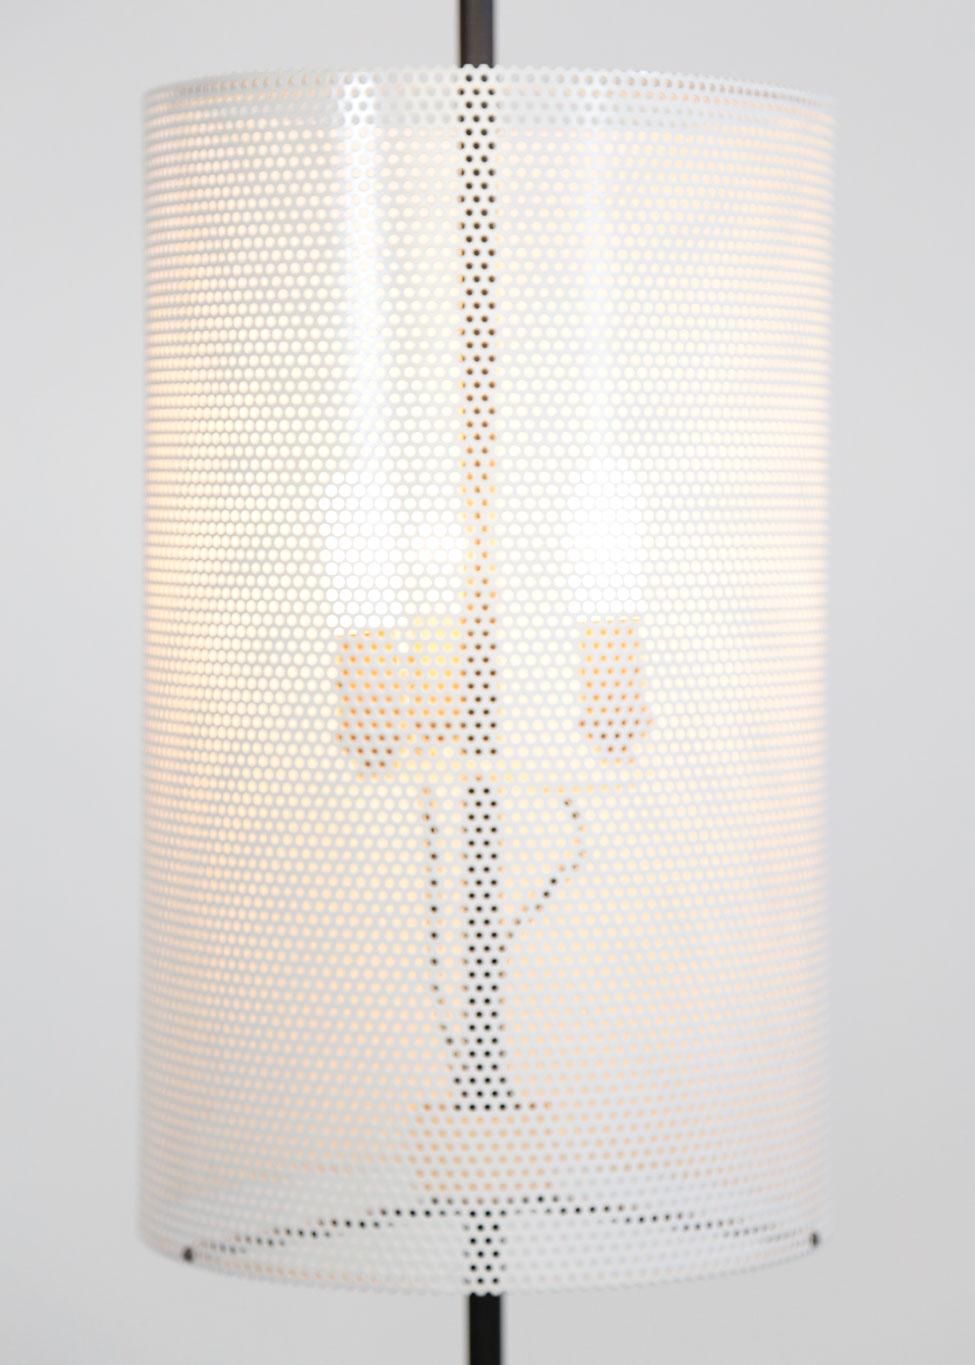 Mid-Century Modern Vintage Floor Lamp with Perforated Metal Shade, 1960s